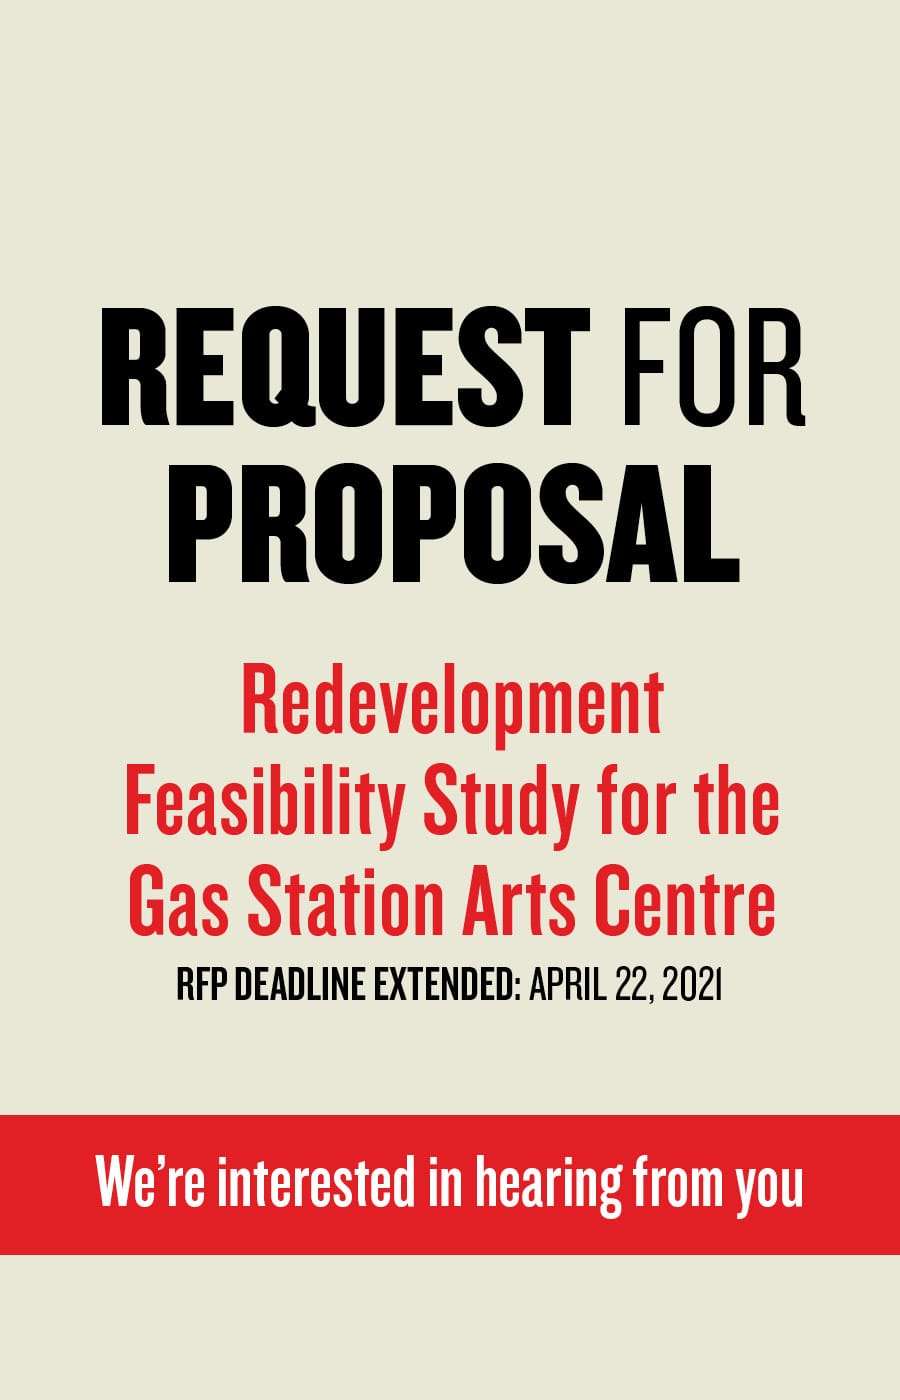 Request for Proposal: Redevelopment Feasibility Study for the GSAC